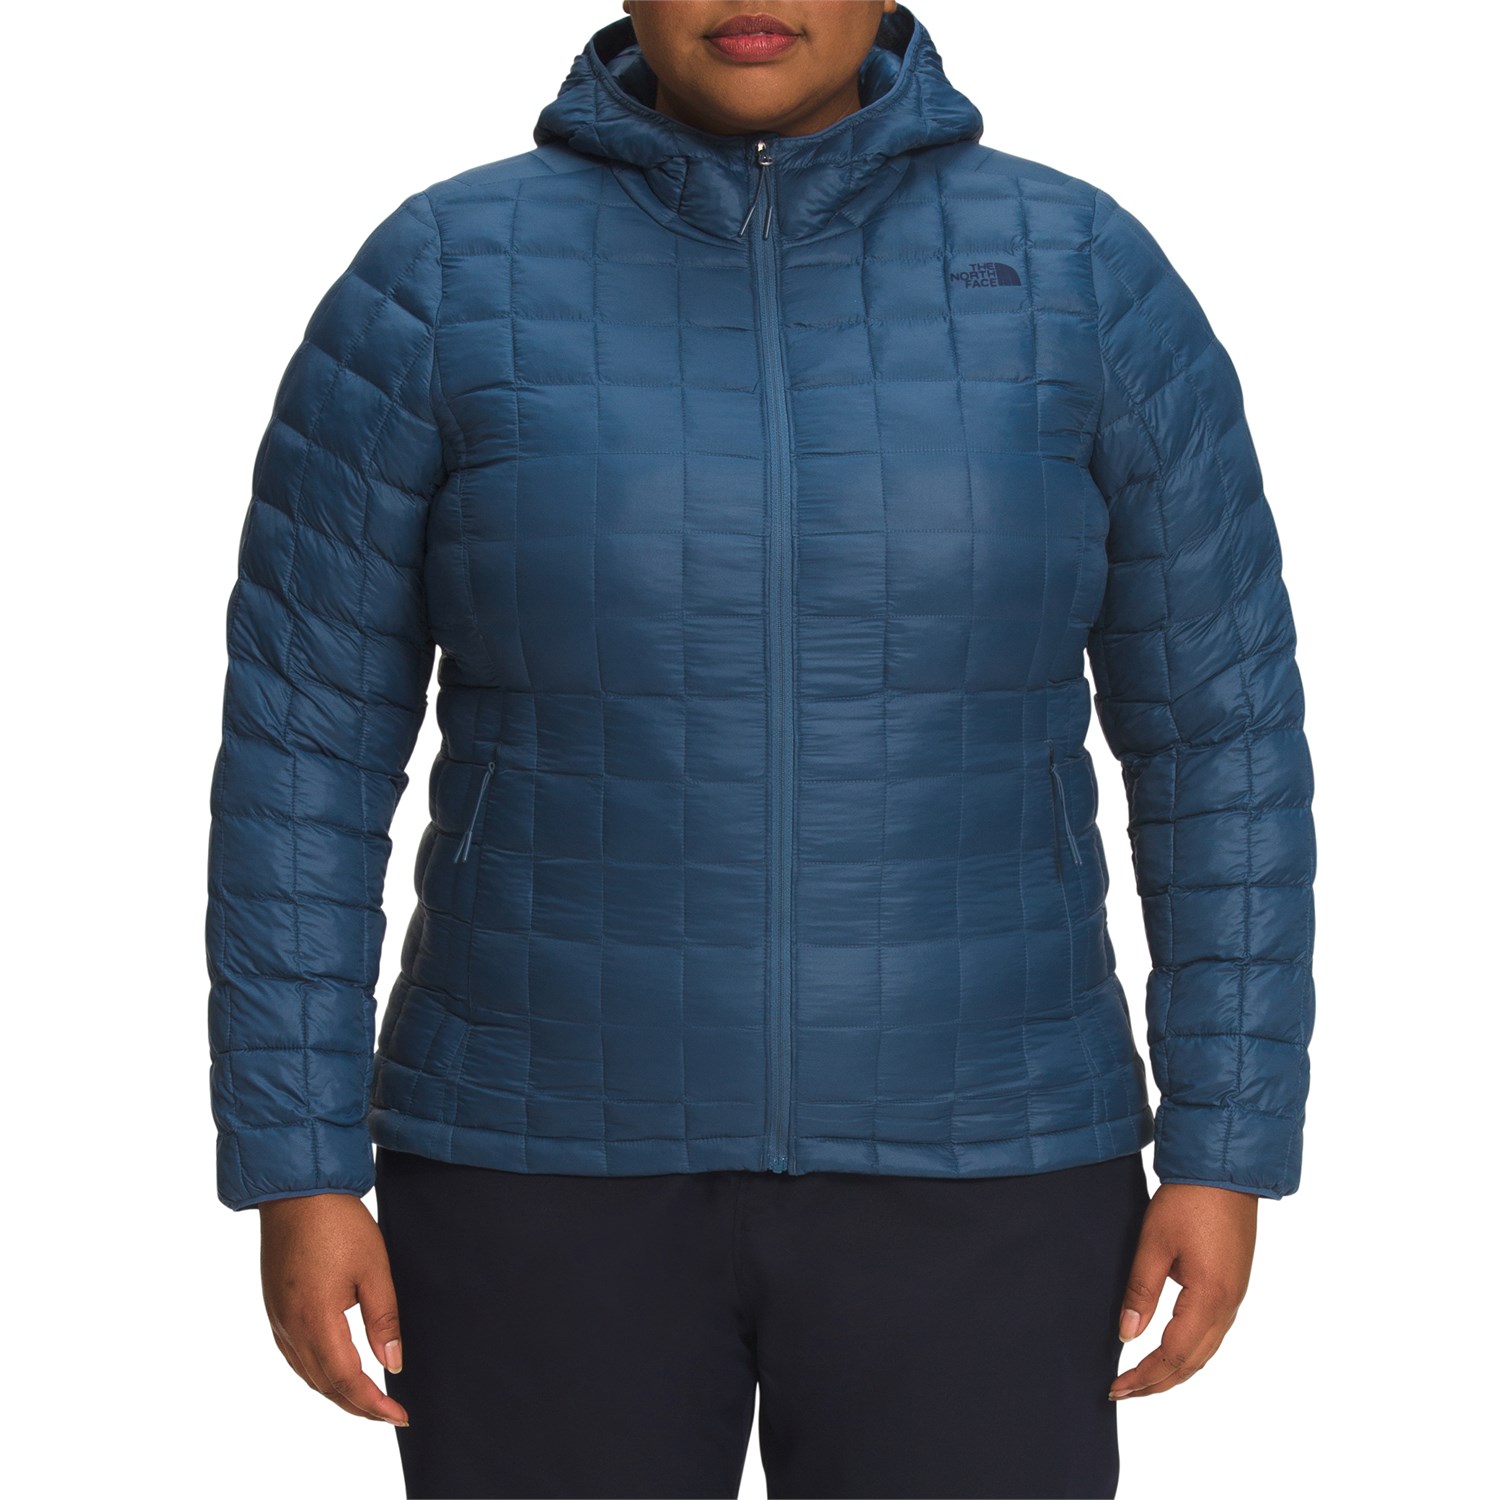 Худи The North Face ThermoBall Eco 2.0 Plus, цвет Shady Blue худи the north face thermoball eco 2 0 plus цвет lavender fog